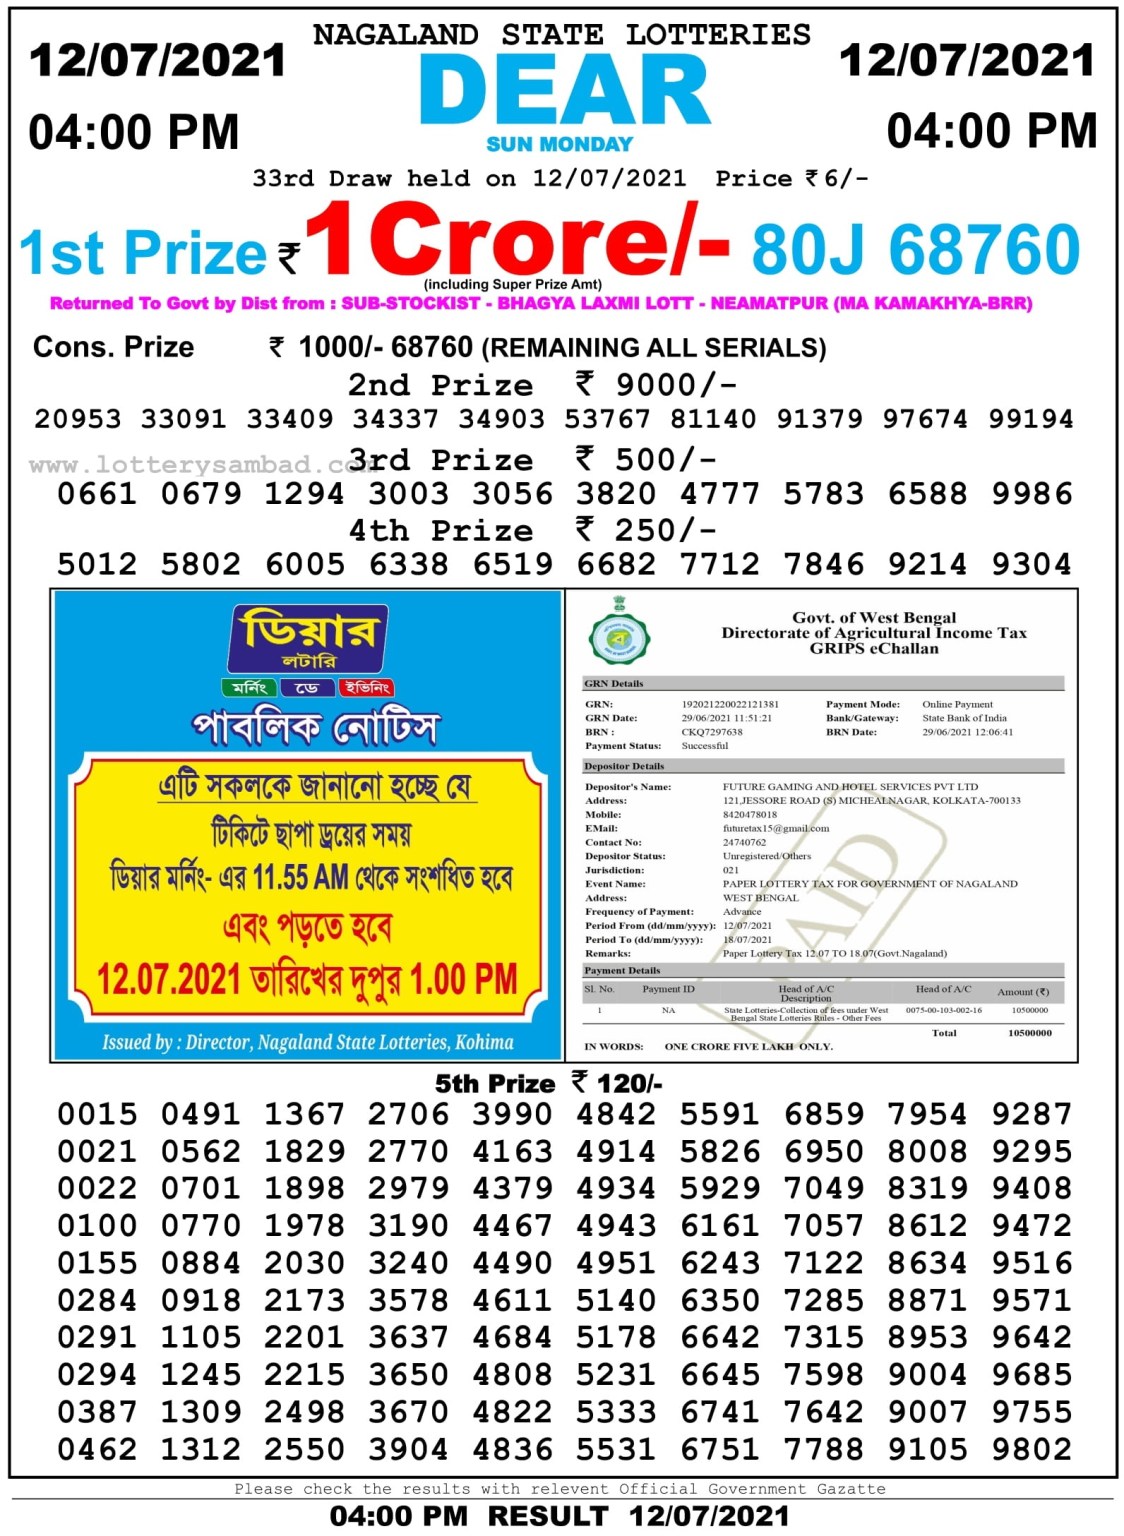 Dear Daily Lottery Result 4PM 12 Jul 2021